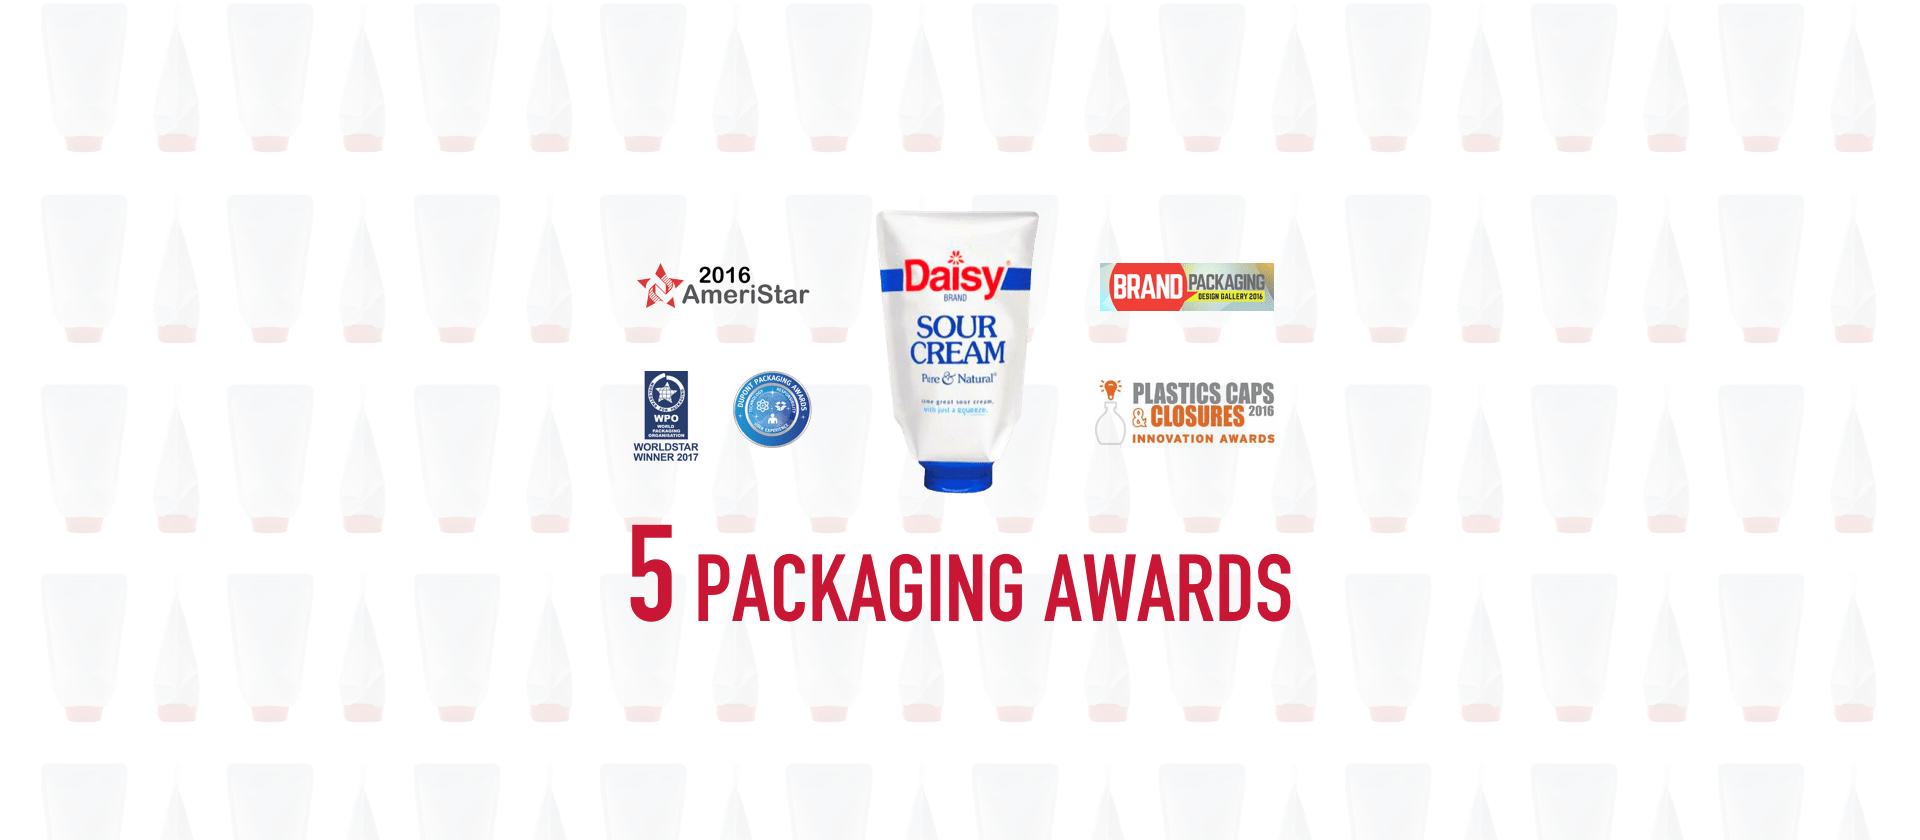 Daisy Squeeze Sour Cream packaging awards